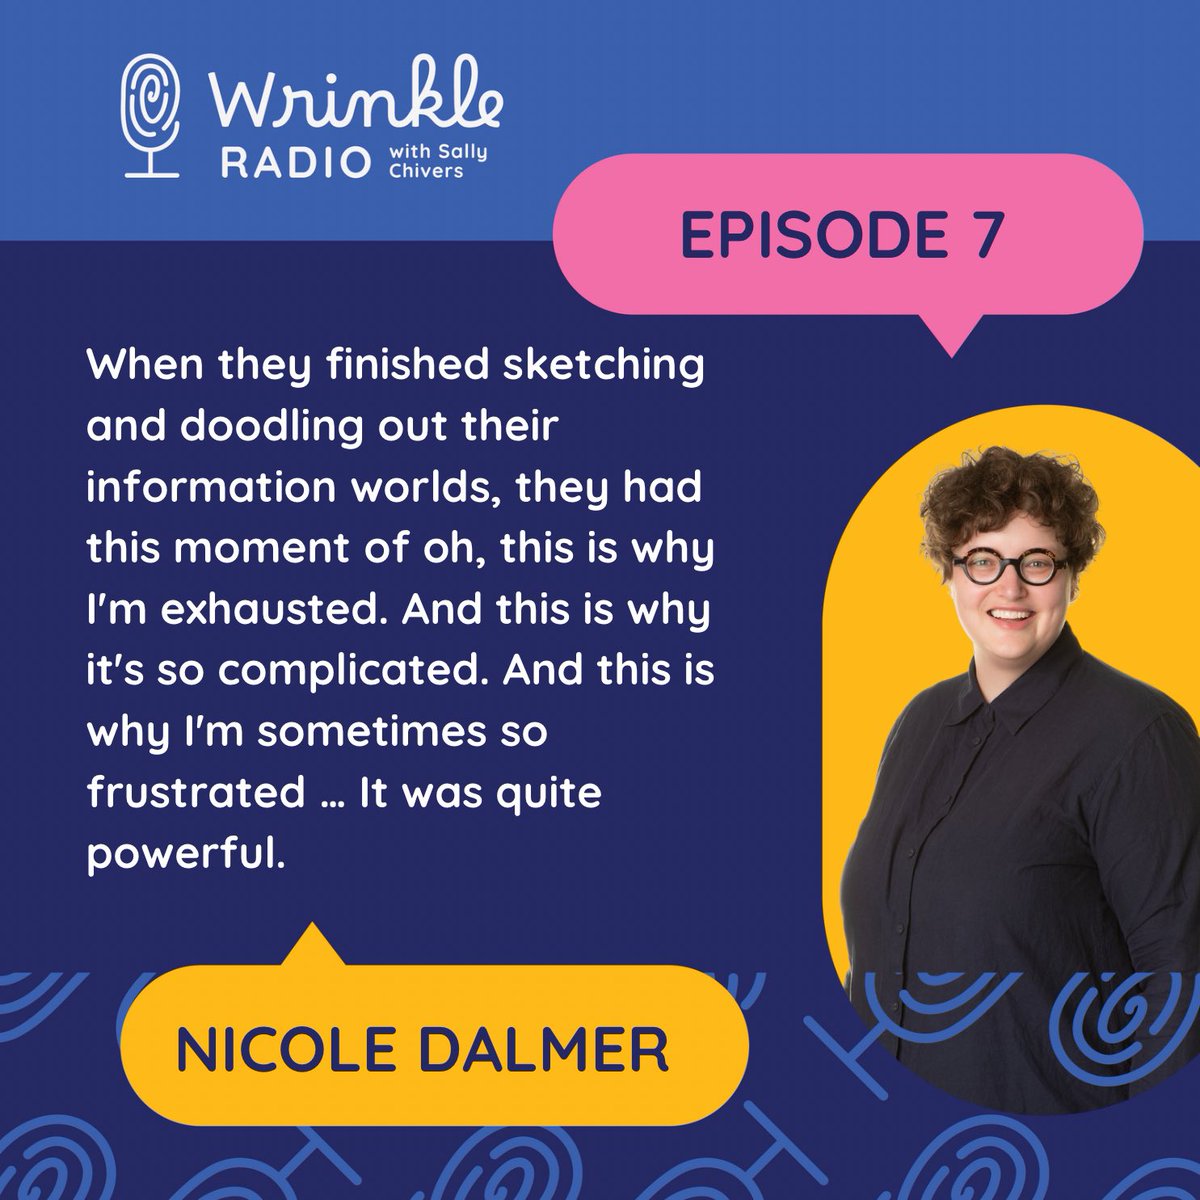 Listen to podcast episode “Information Piles and Palaces” to learn more about @NicoleDalmer’s research into how getting informed is an often overlooked part of #carework … and more. #gerotwitter @ACT_Concordia 

podcasts.apple.com/ca/podcast/wri…